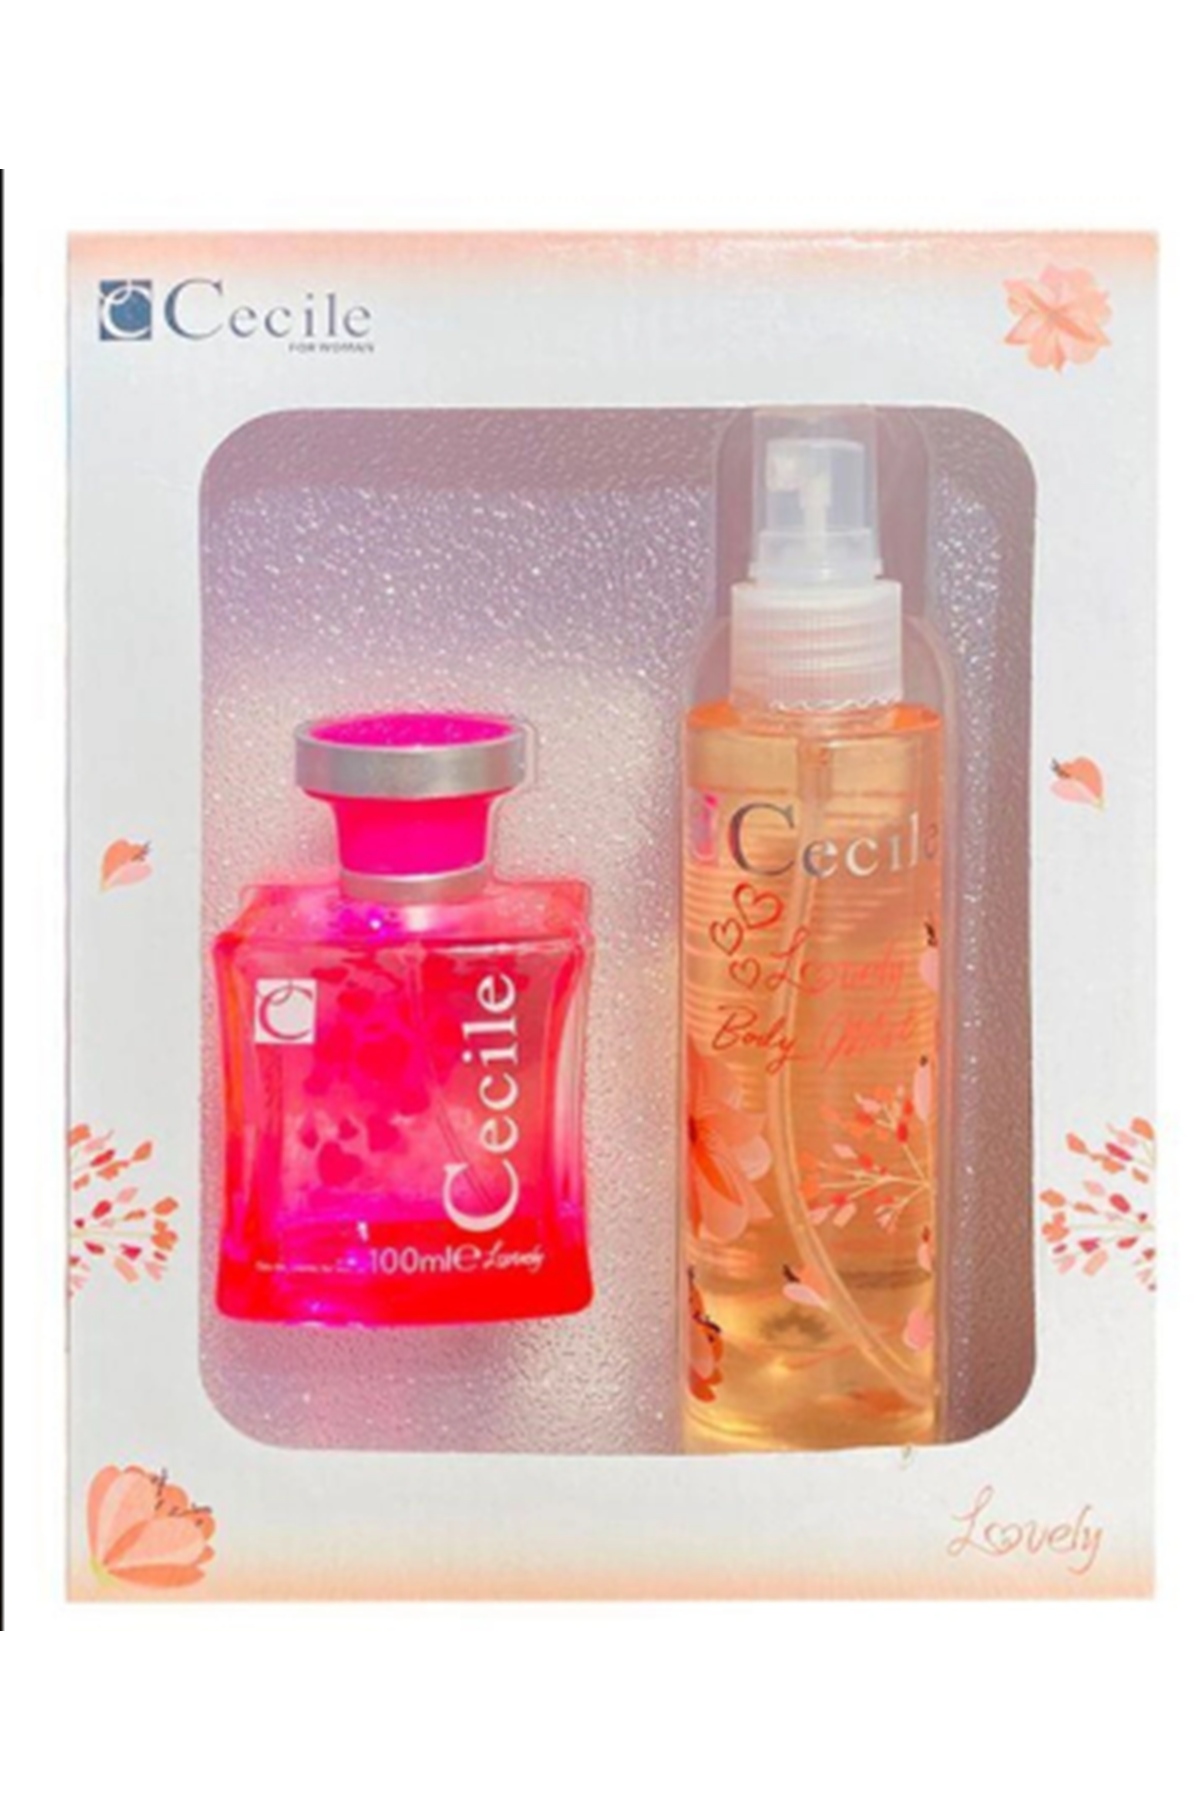 Cecile Lovely Bayan Kofre 100 Ml+150 Ml Body Mist